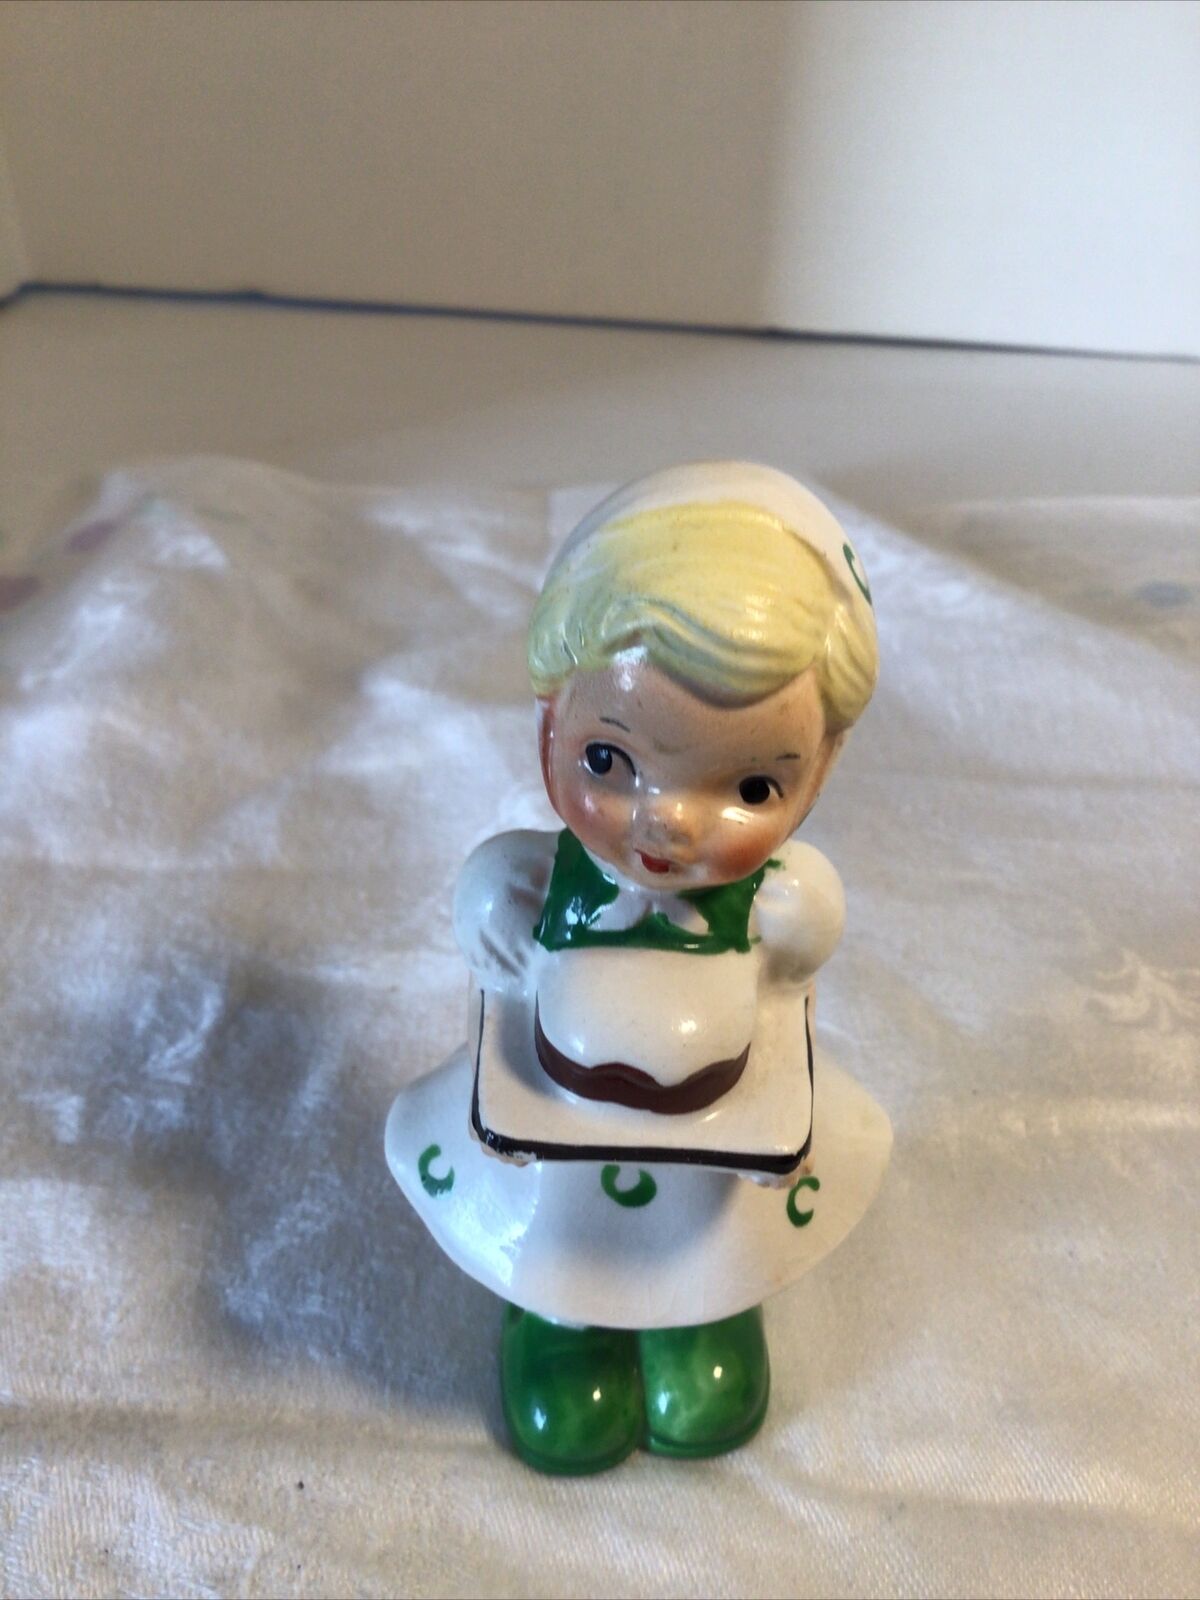 UCAGCO Figurine Girl, Ceramic, Japan, 4&1/4 Tall. Green Shoes Carrying A Cake.